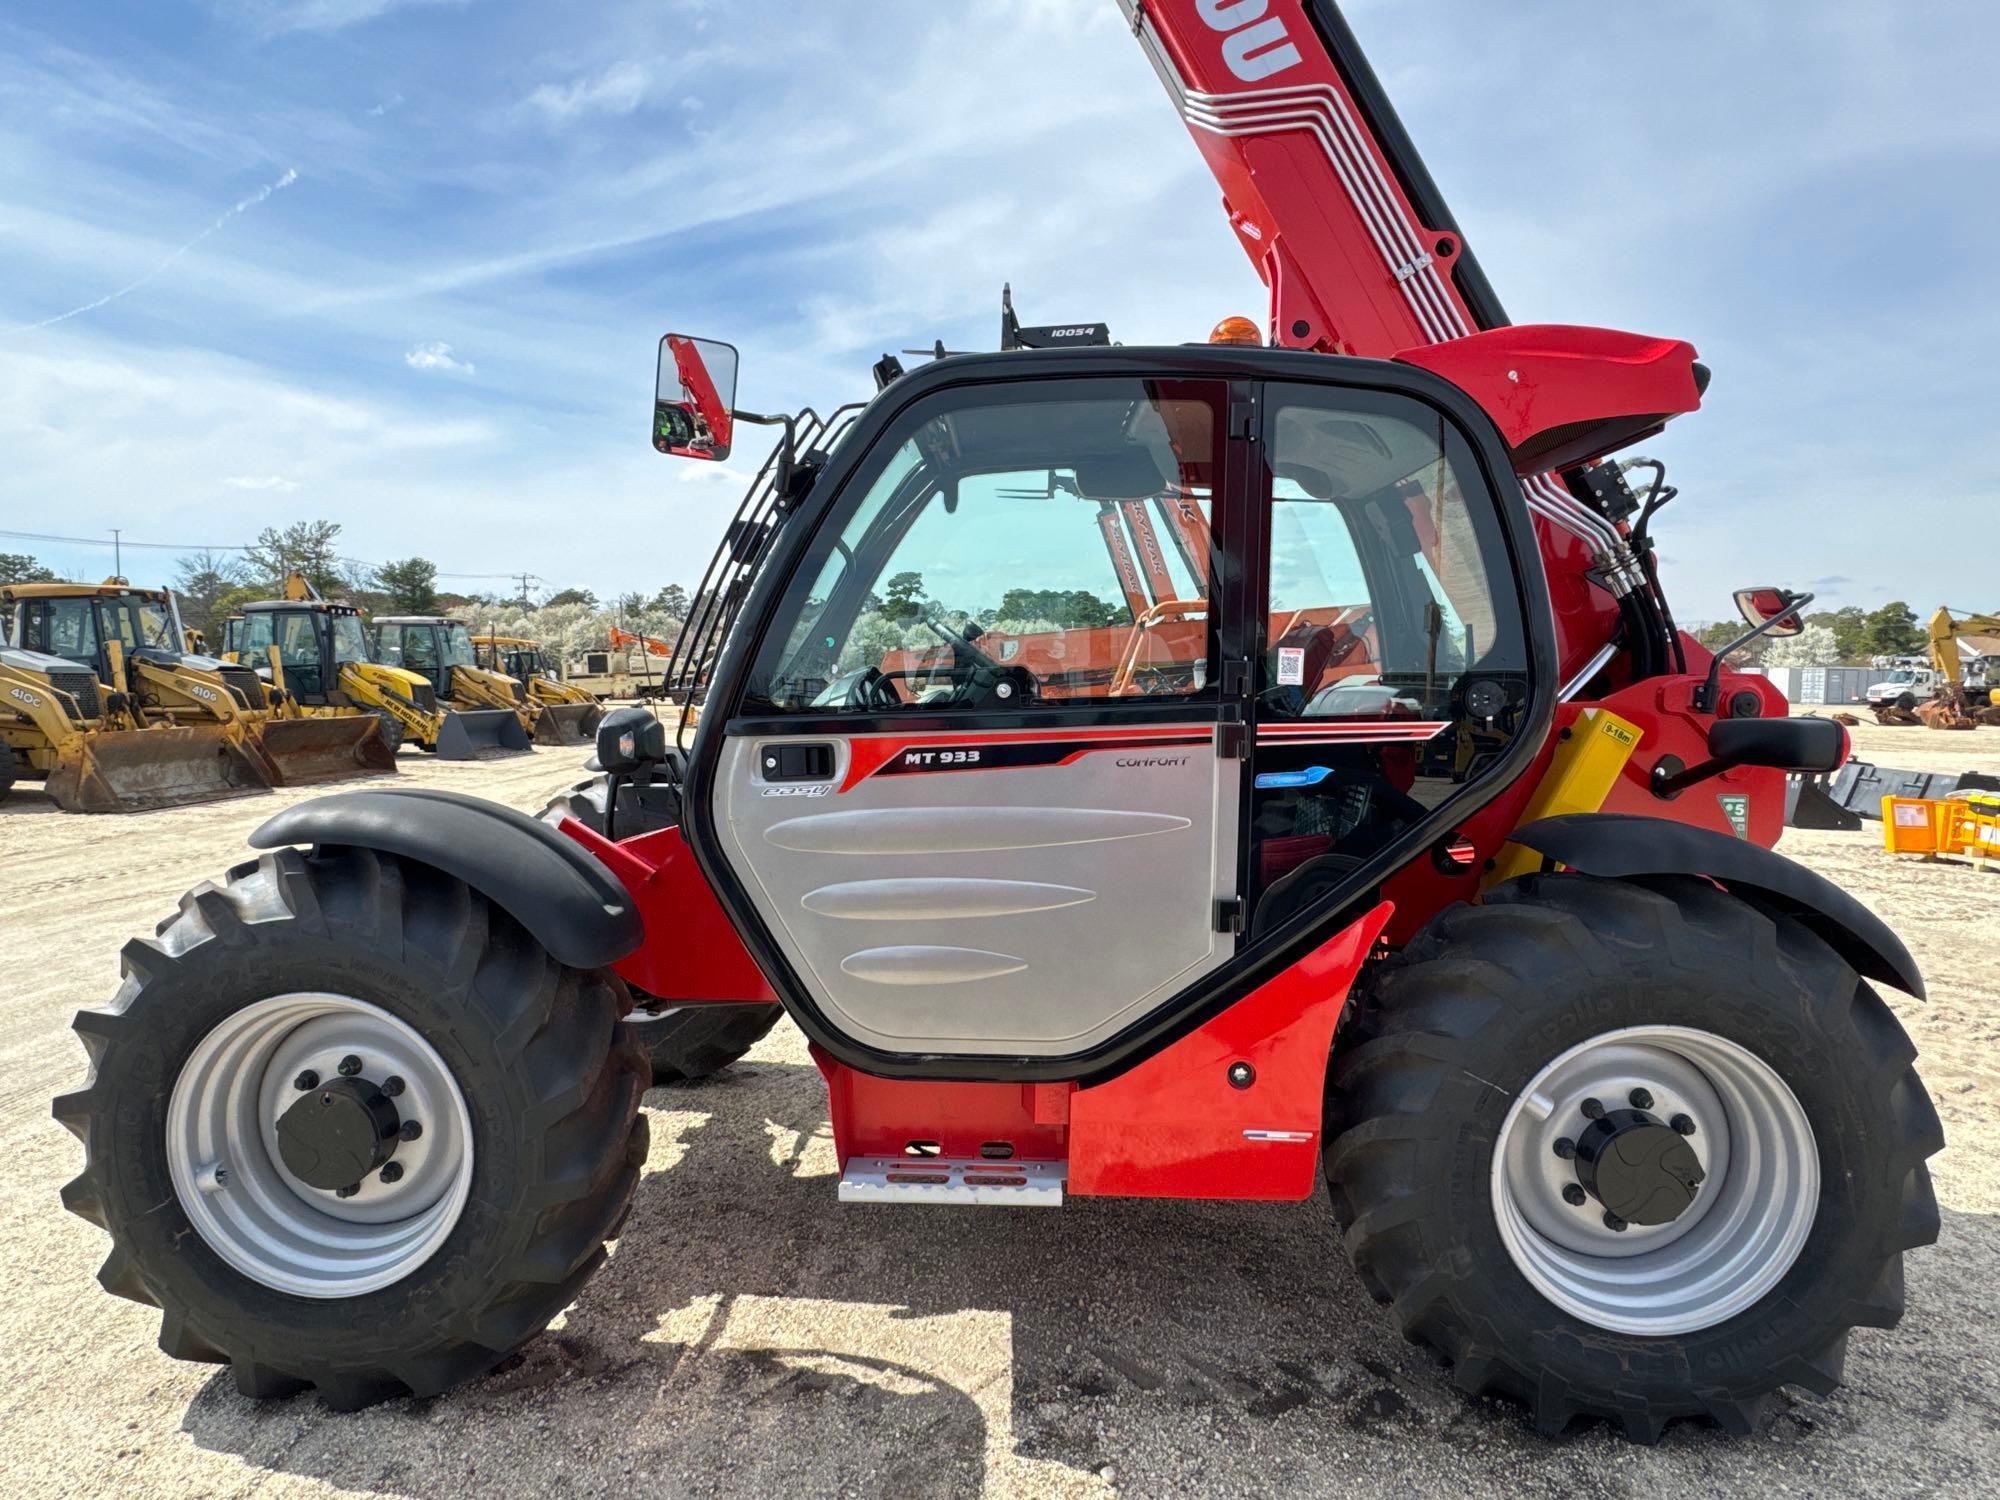 NEW UNUSED MANITOU...MT933 EASY TELESCOPIC FORKLIFT 4x4, powered by diesel engine, equipped with